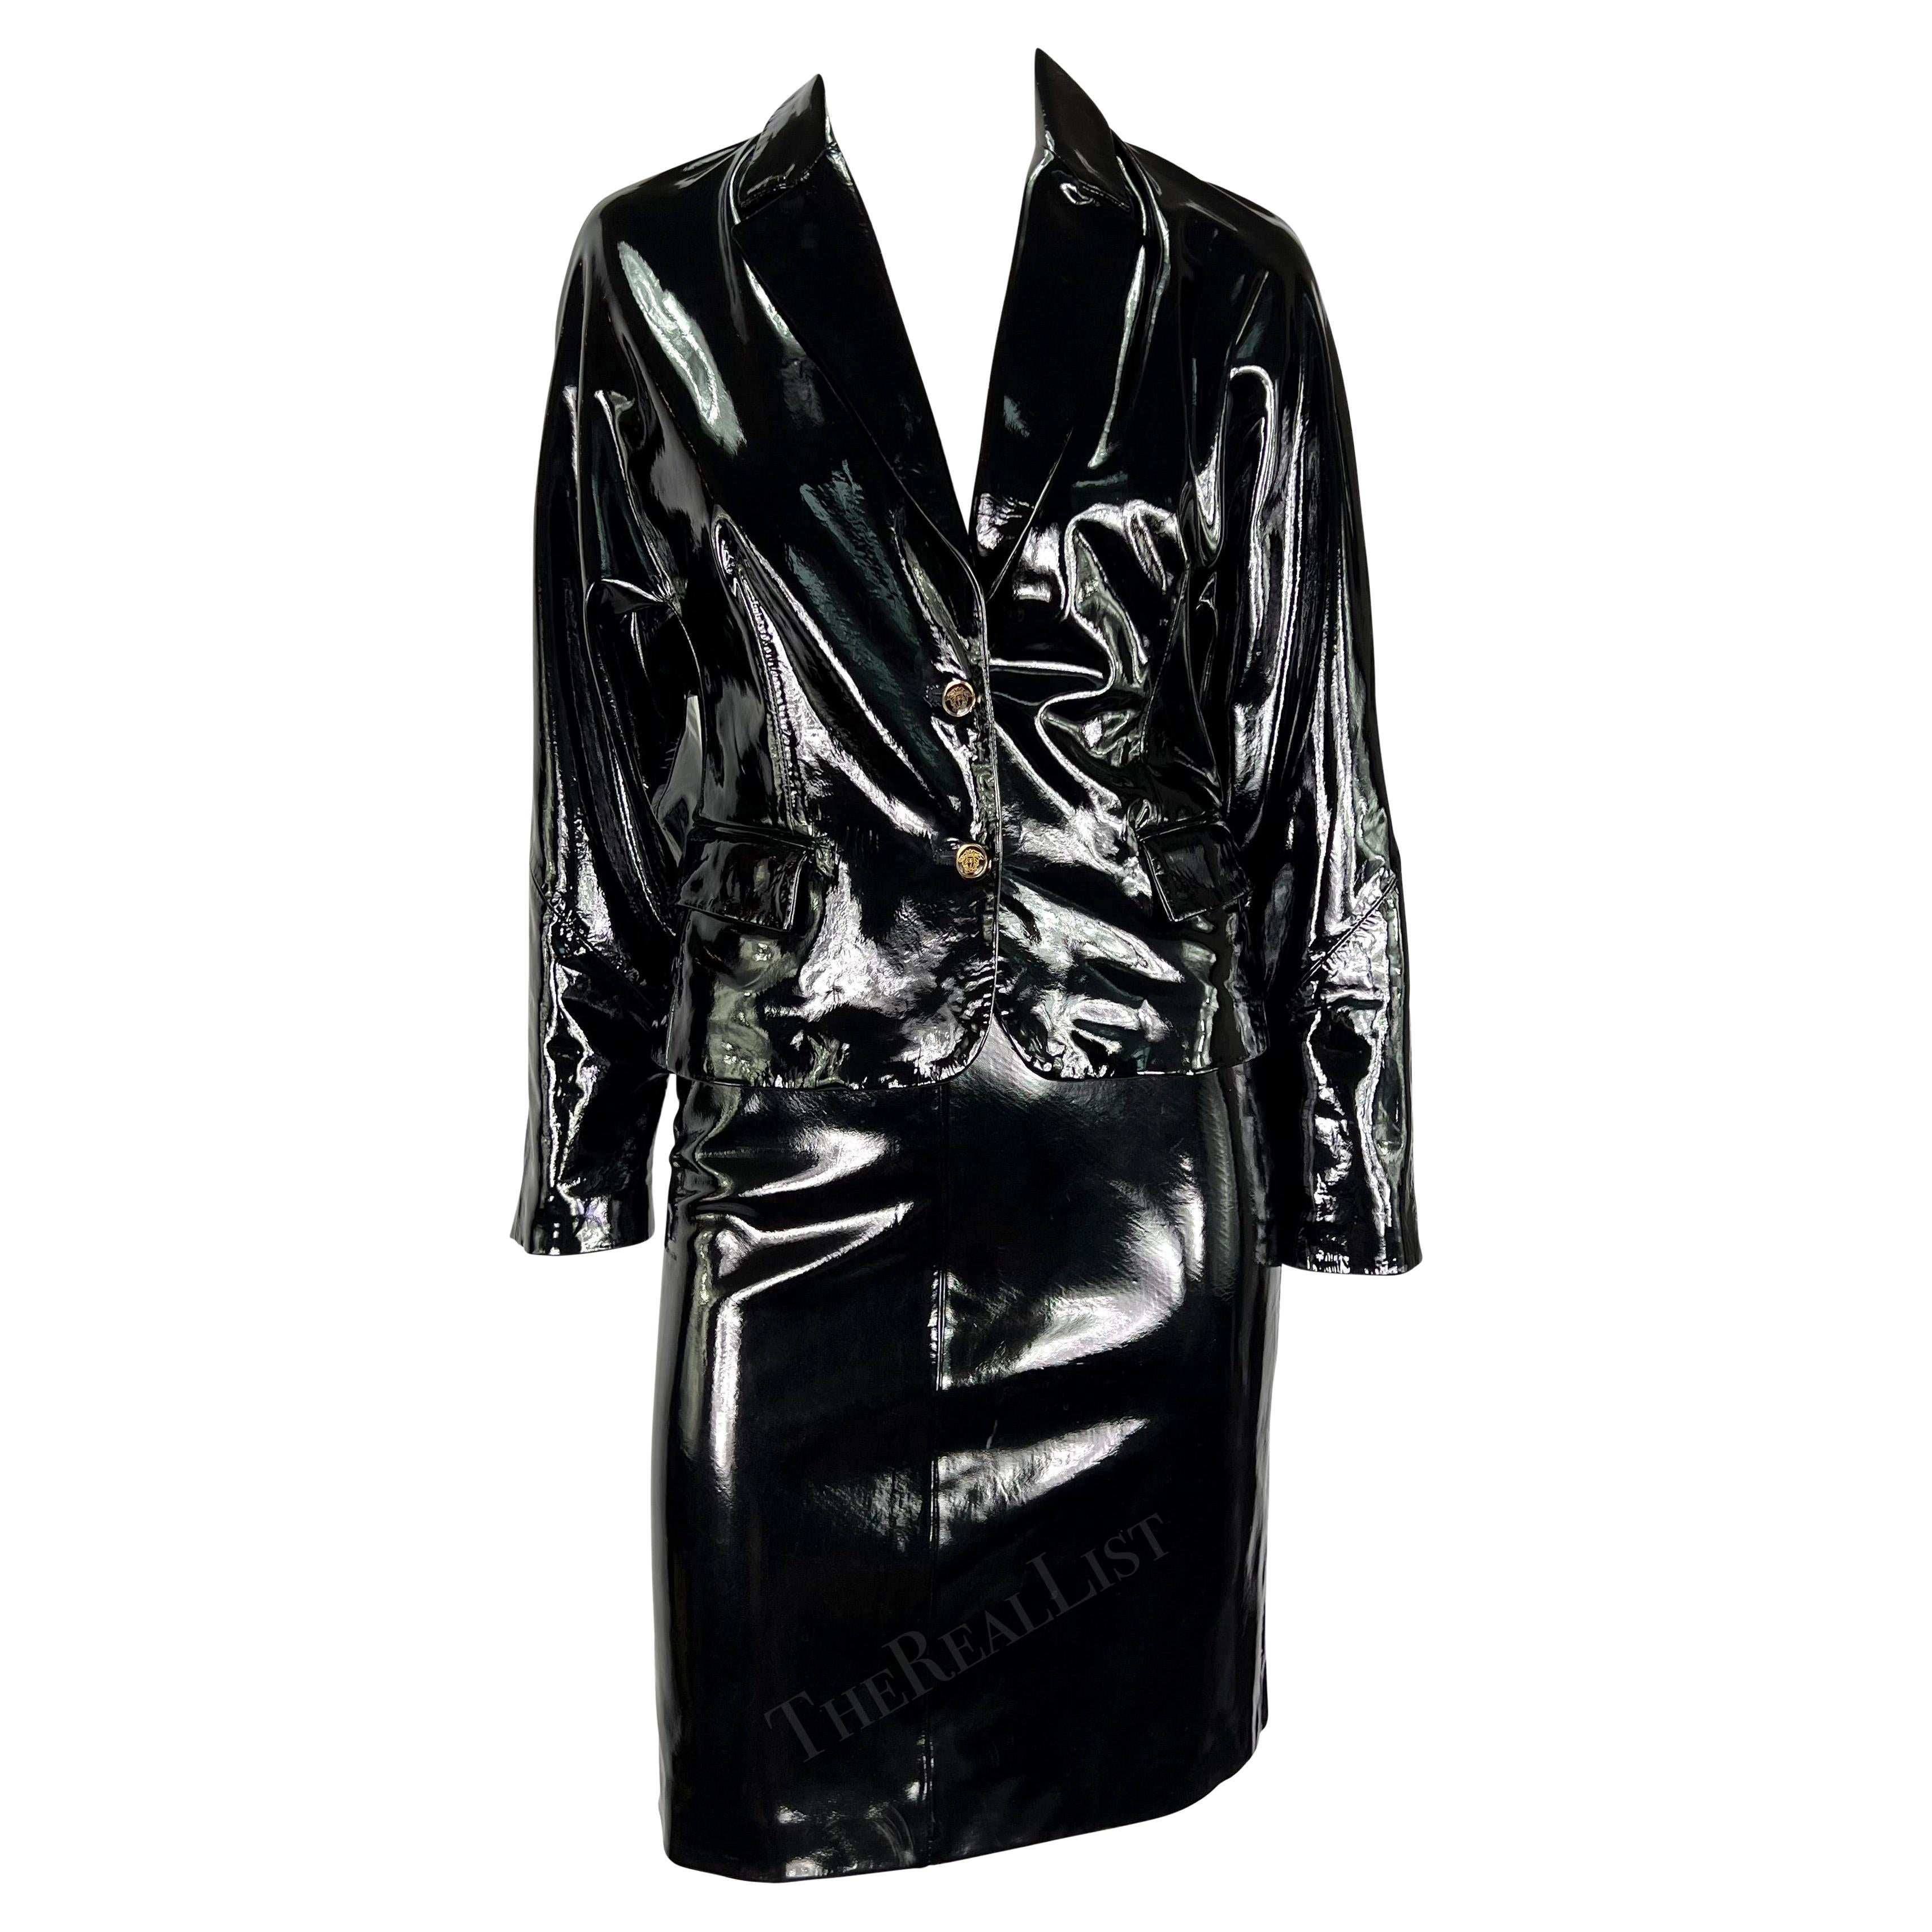 S/S 2001 Gianni Versace by Dontella Runway Black Patent Leather Moto Skirt Suit 